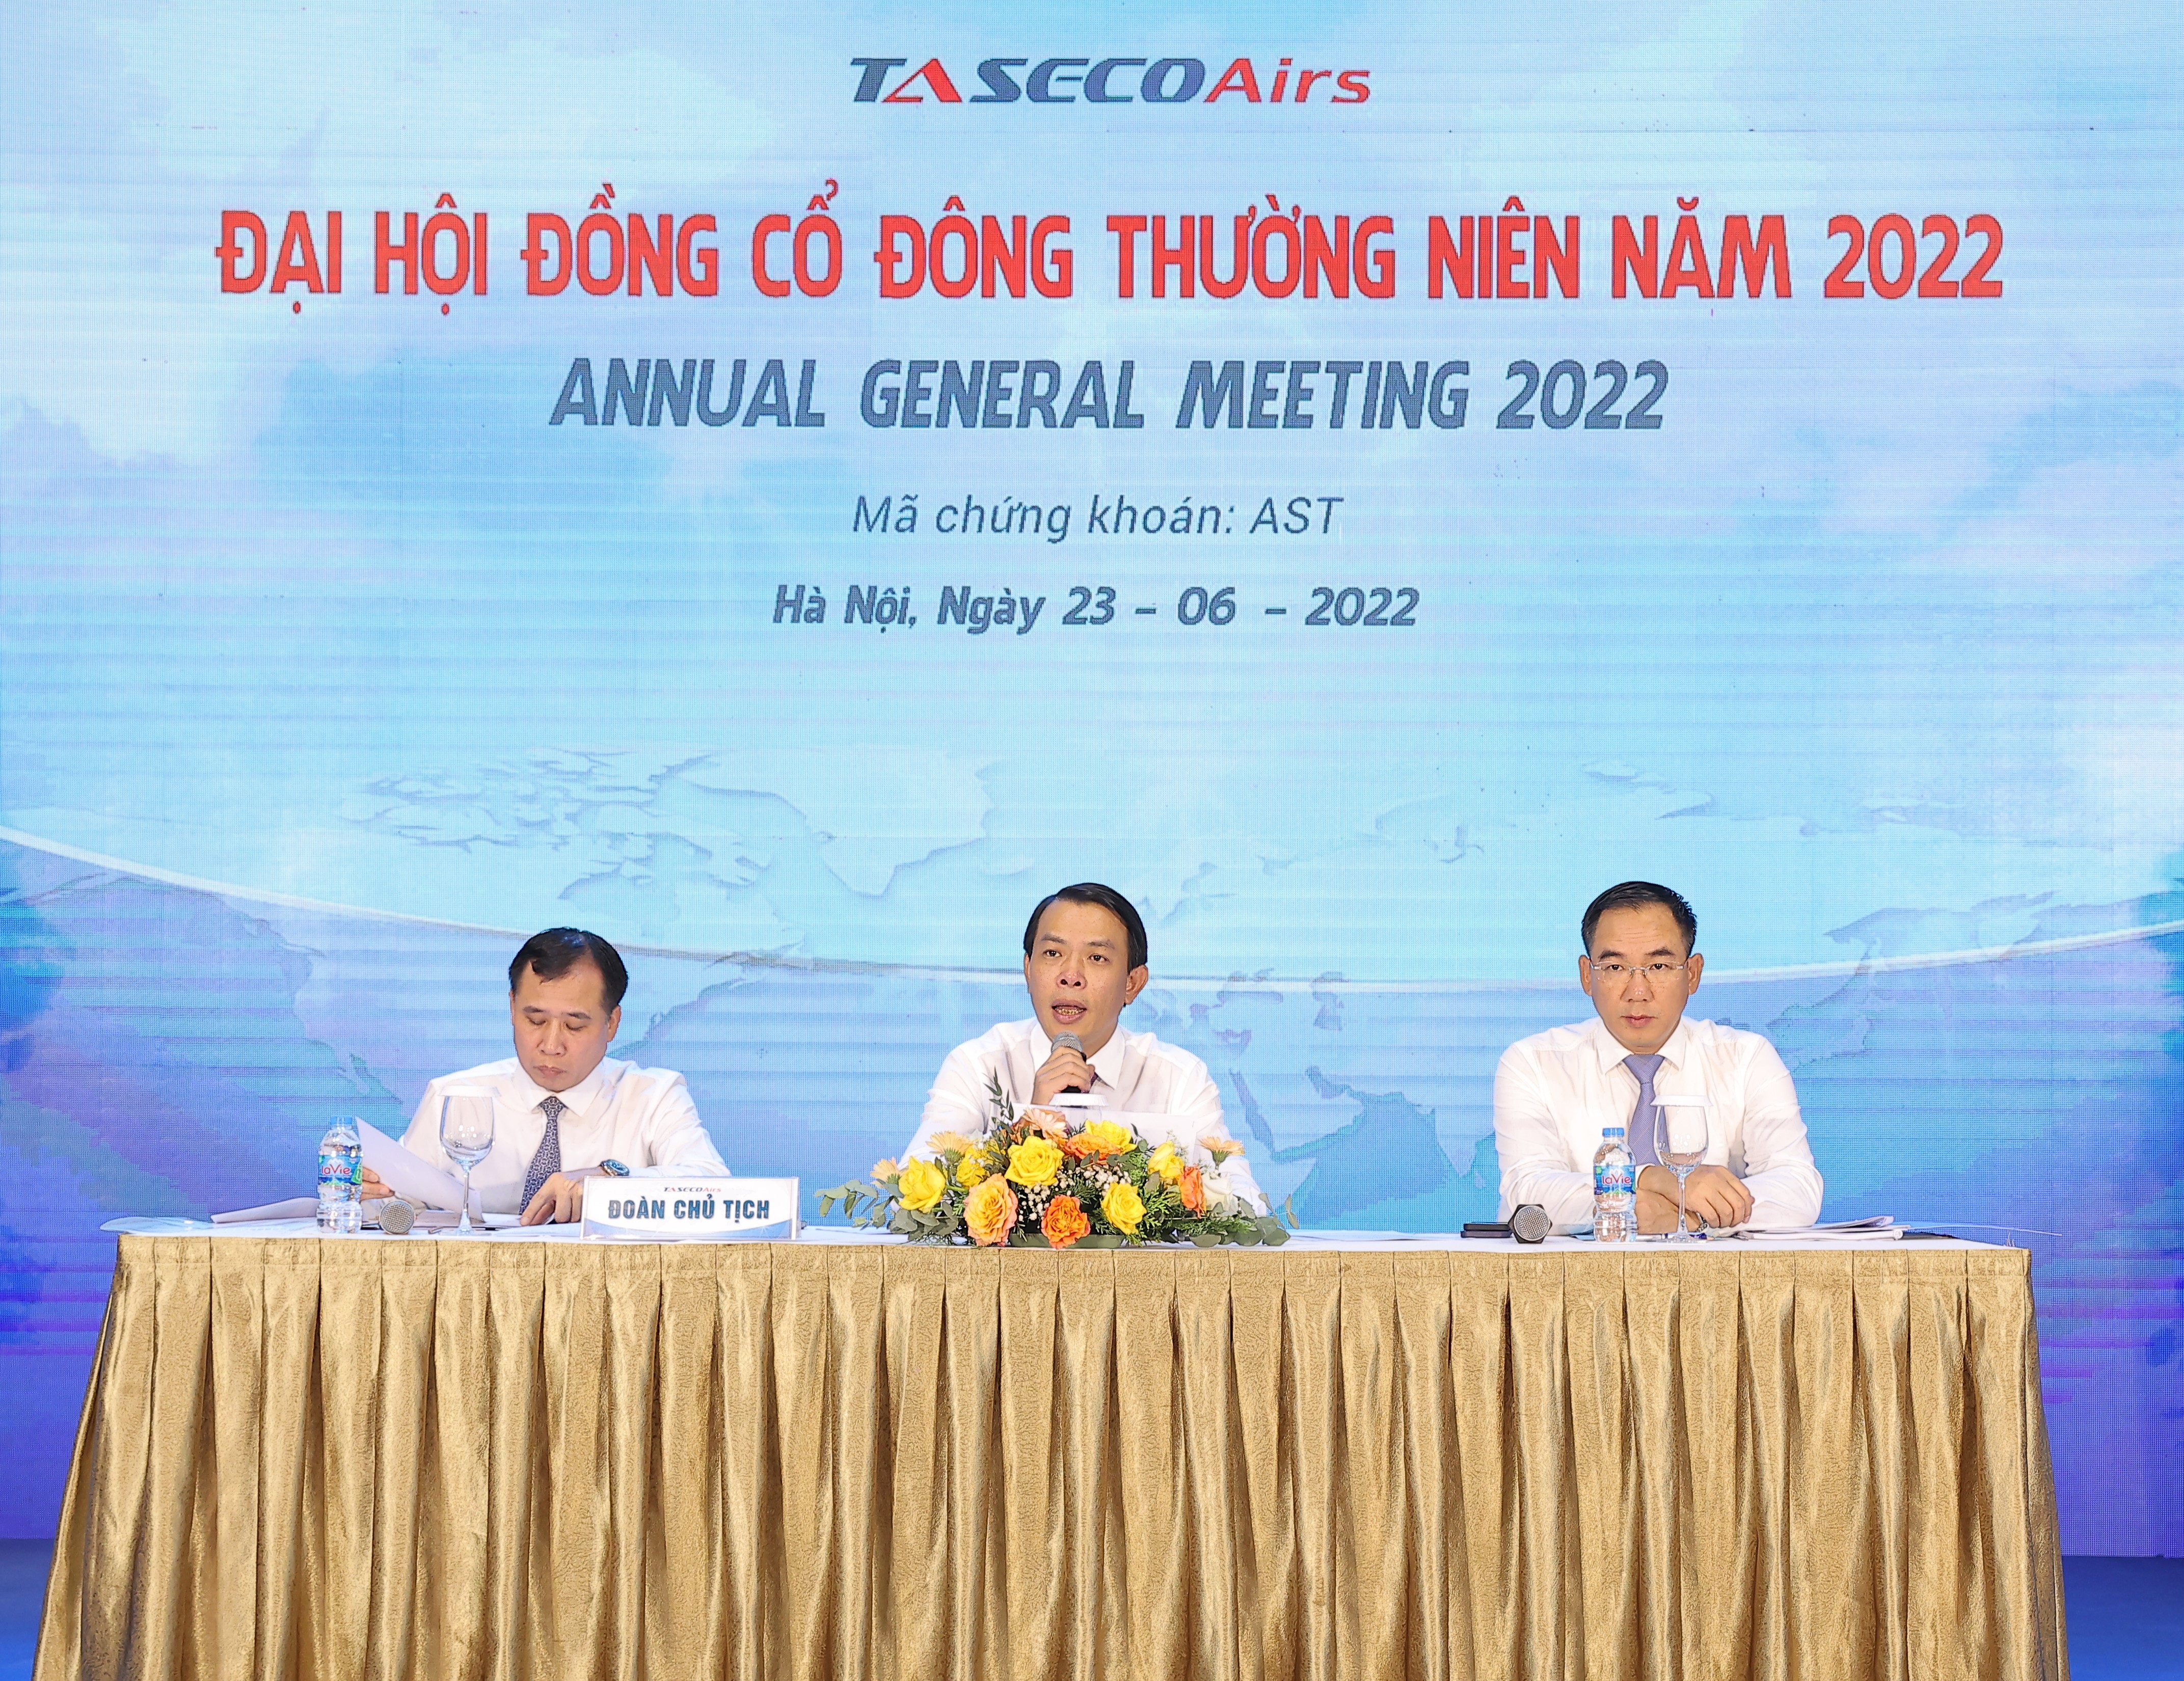 TASECO AIRS 2022 AGM: POSITIVE SIGNAL AS AVIATION RECOVERS